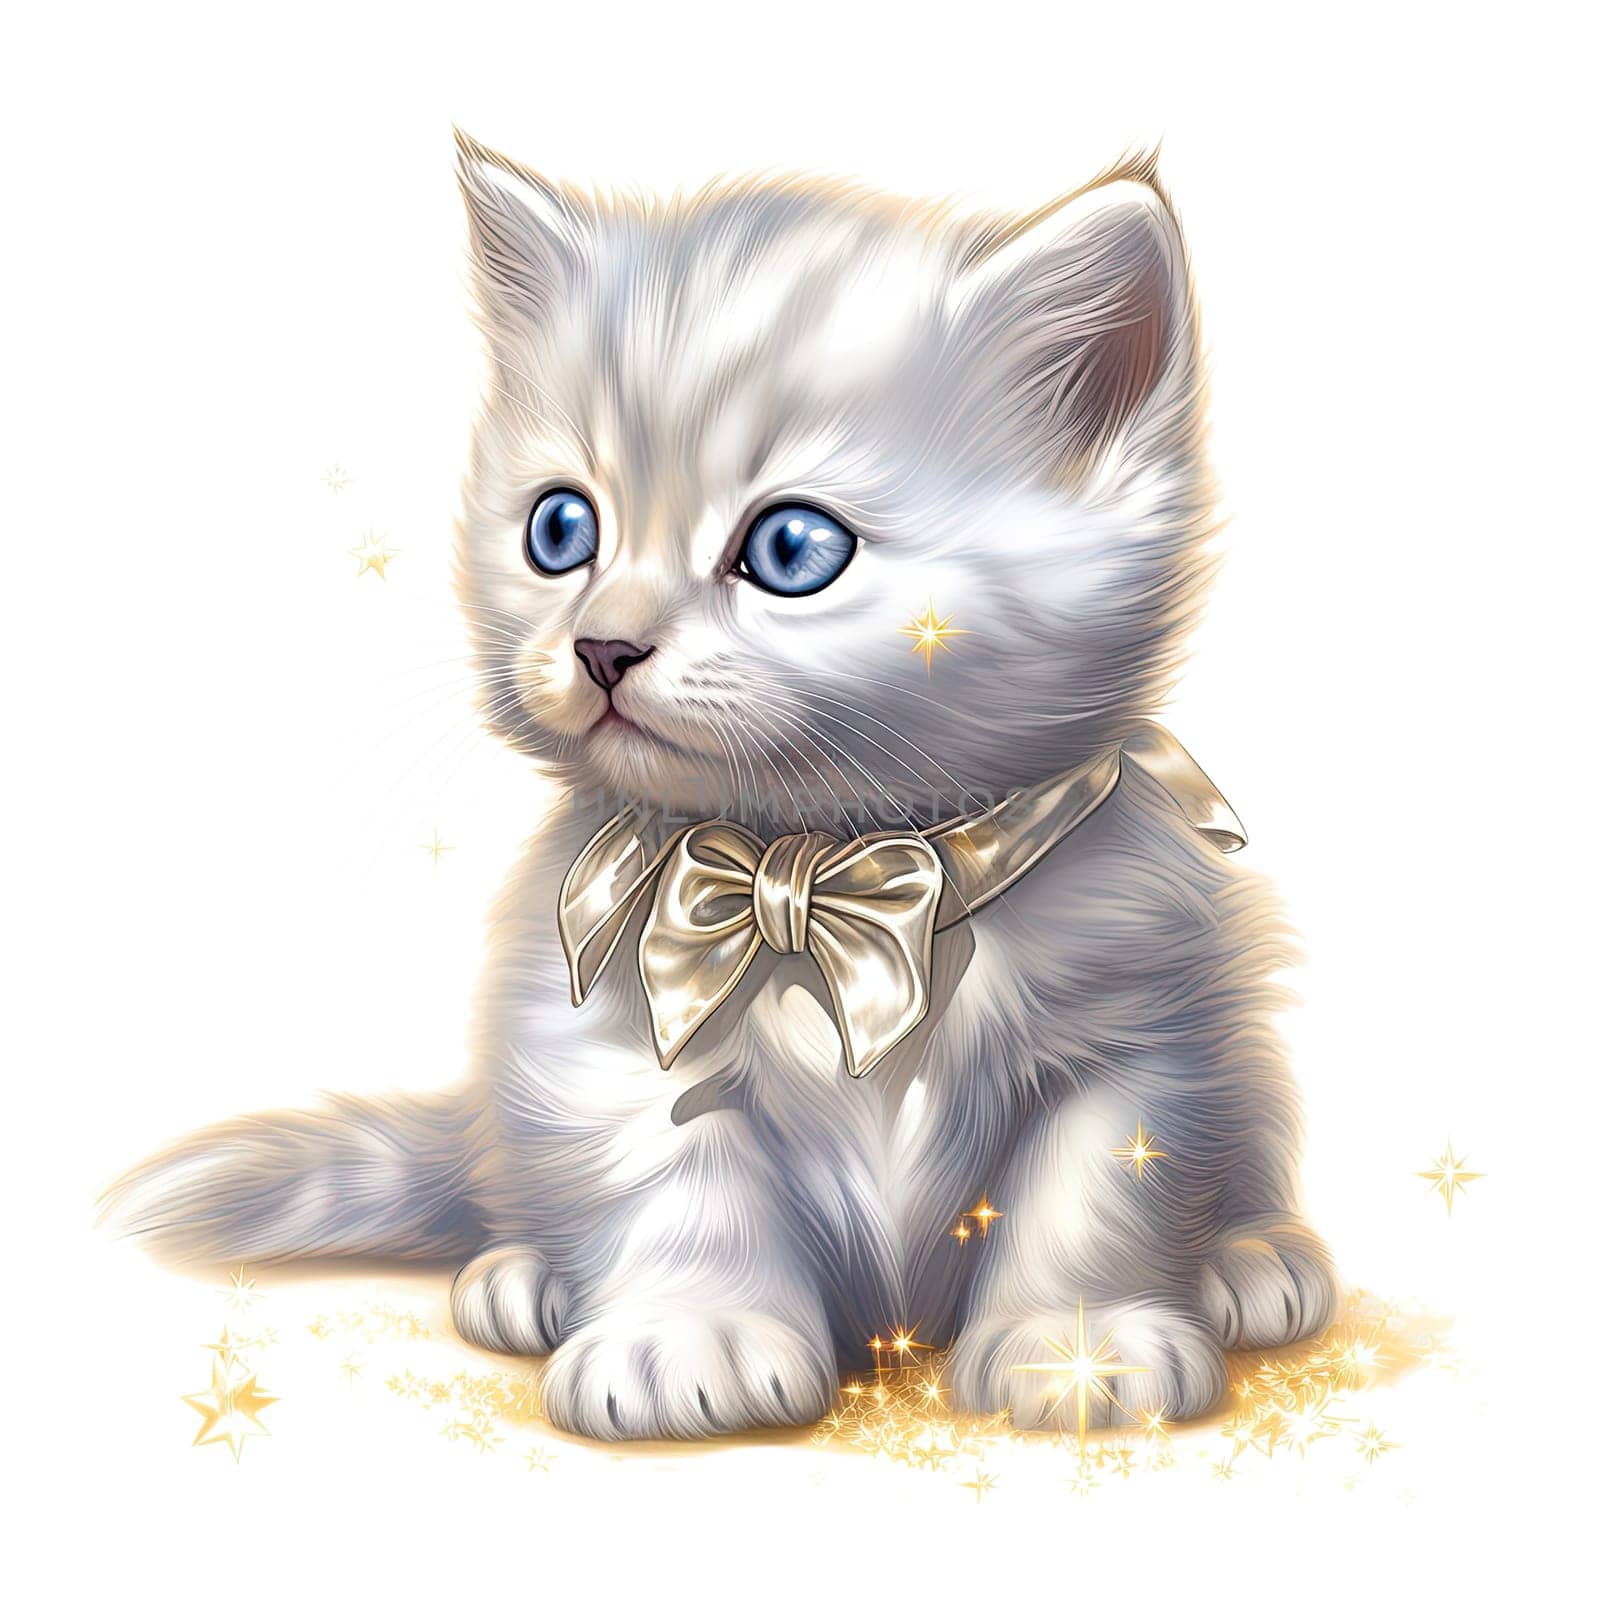 Illustration of an adorable cat on a transparent background